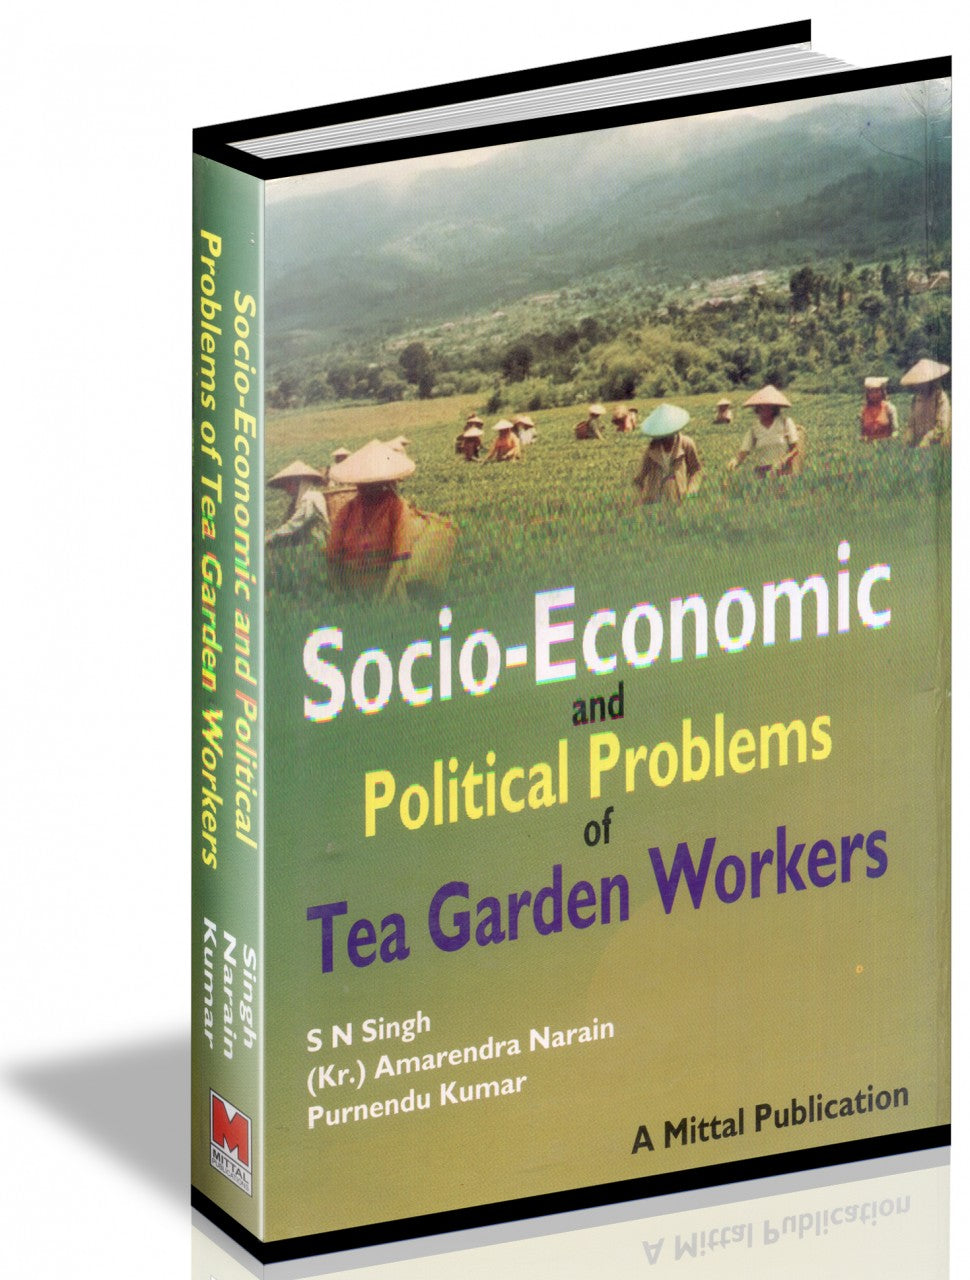 Socio-Economic and Political Problems of Tea Garden Workers